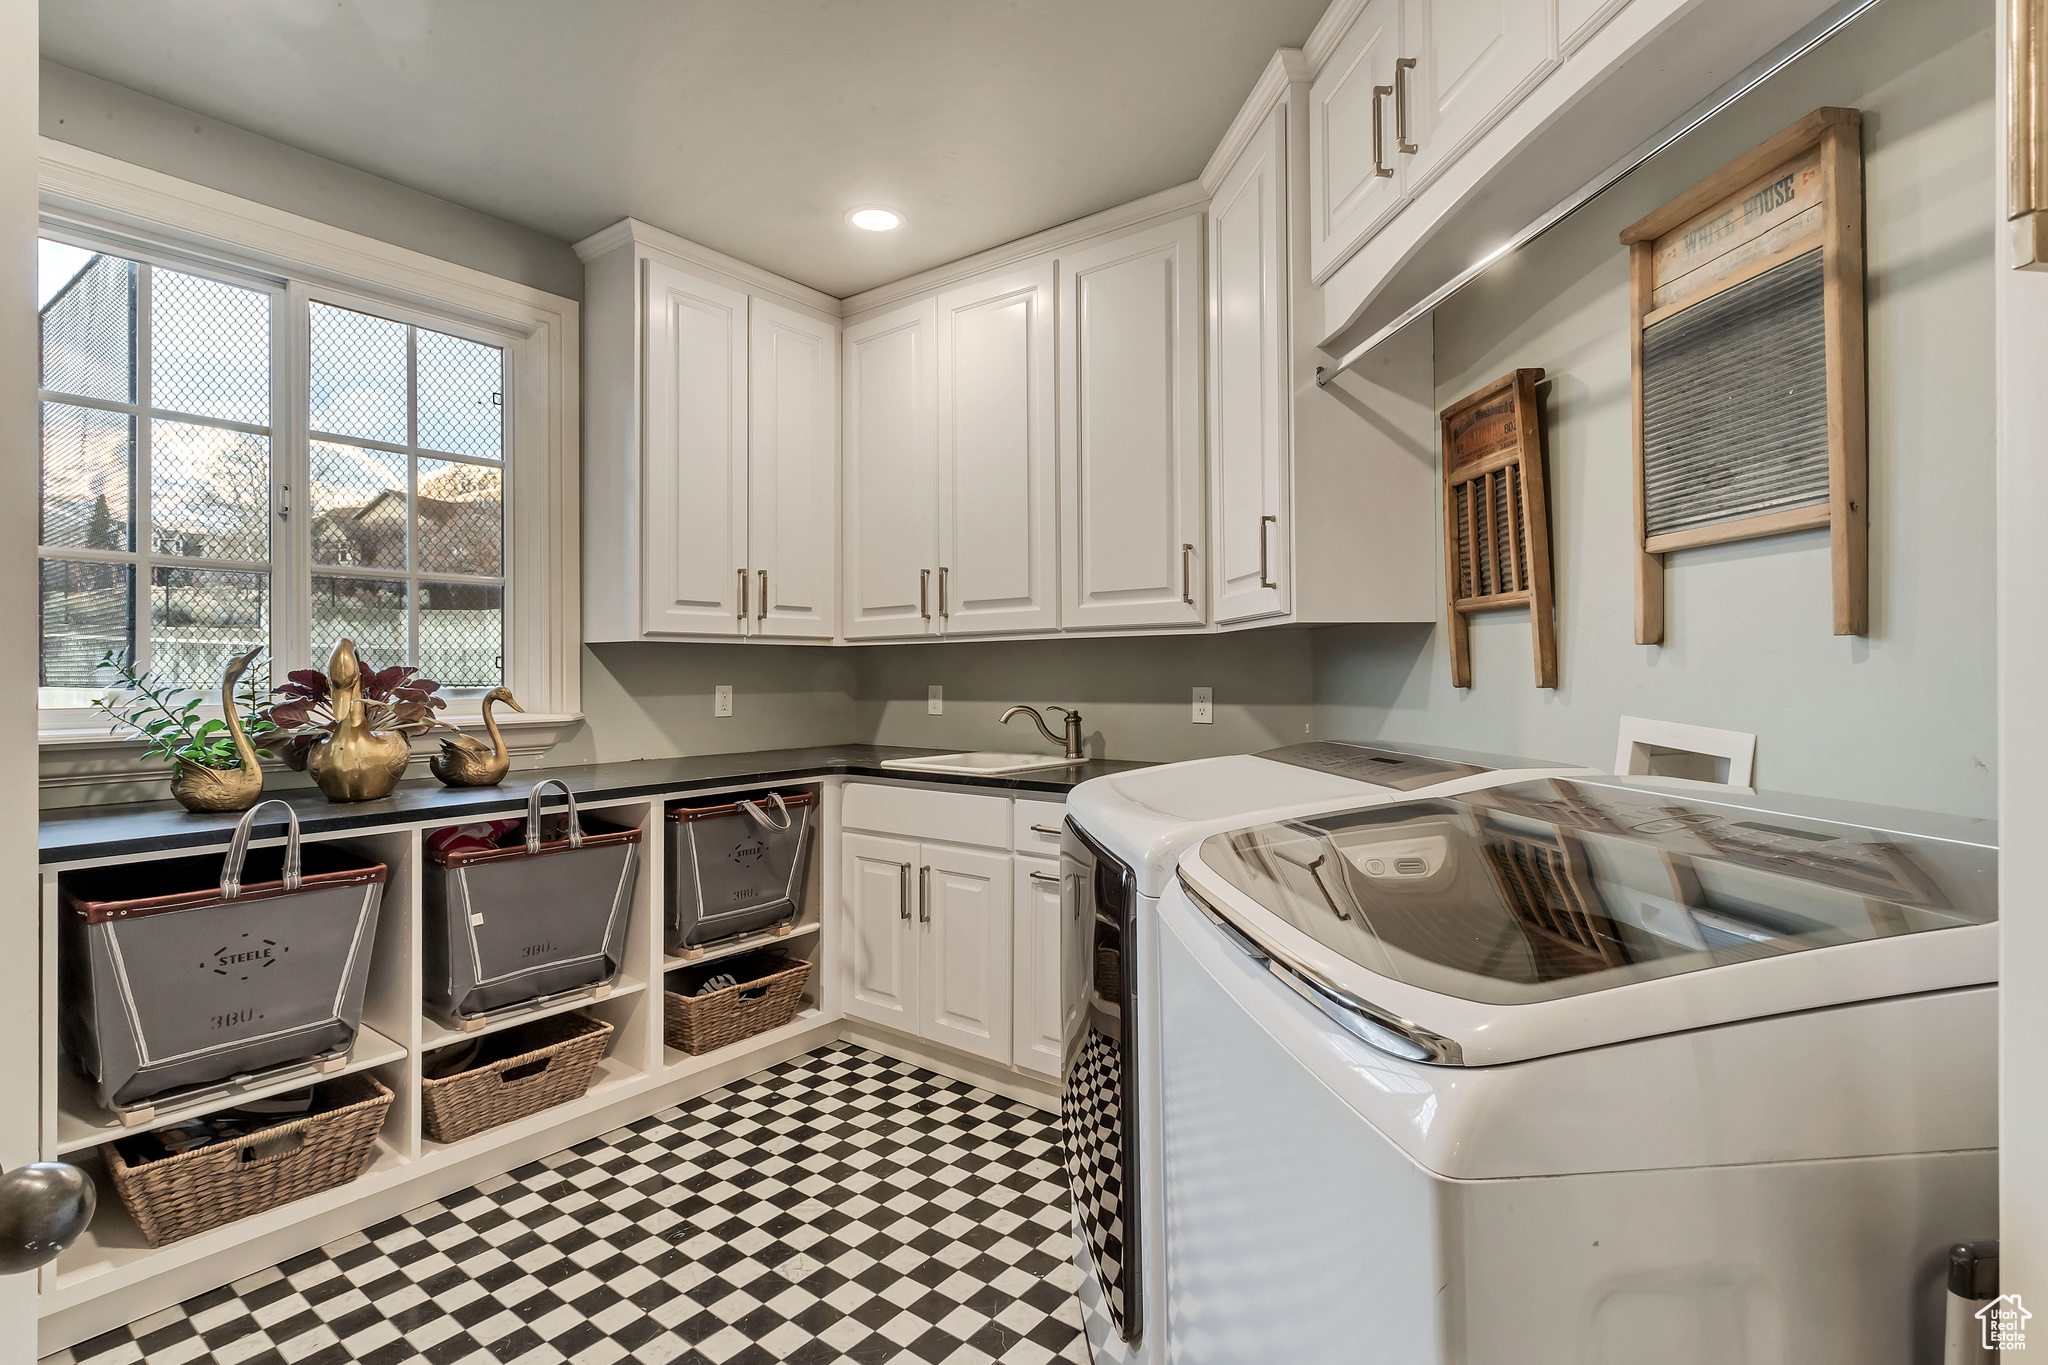 Laundry room featuring cabinets, sink, washing machine and dryer, and marble floors